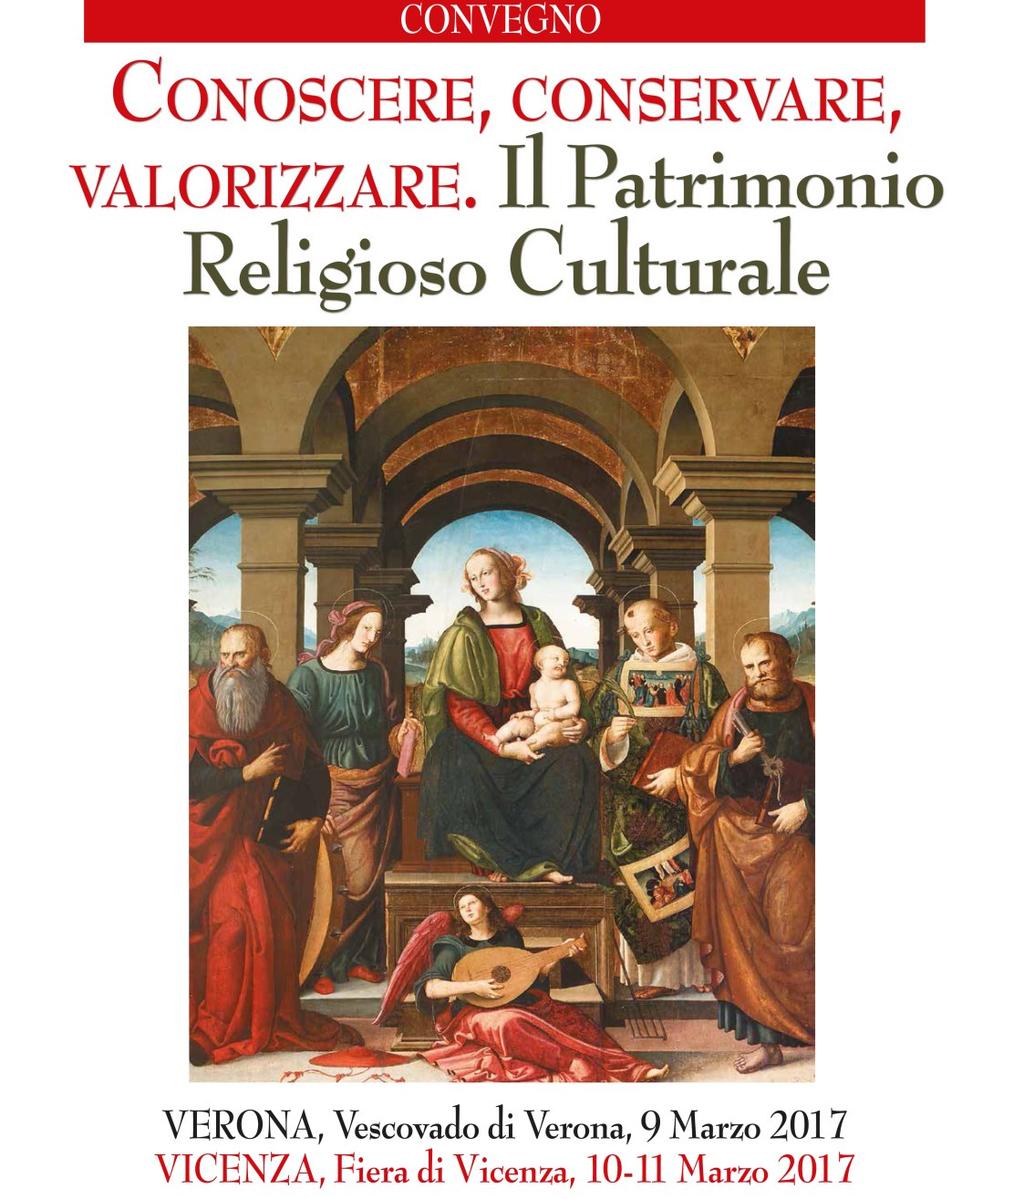 The conference, promoted by the Istituto Superiore Scienze Religiose S.